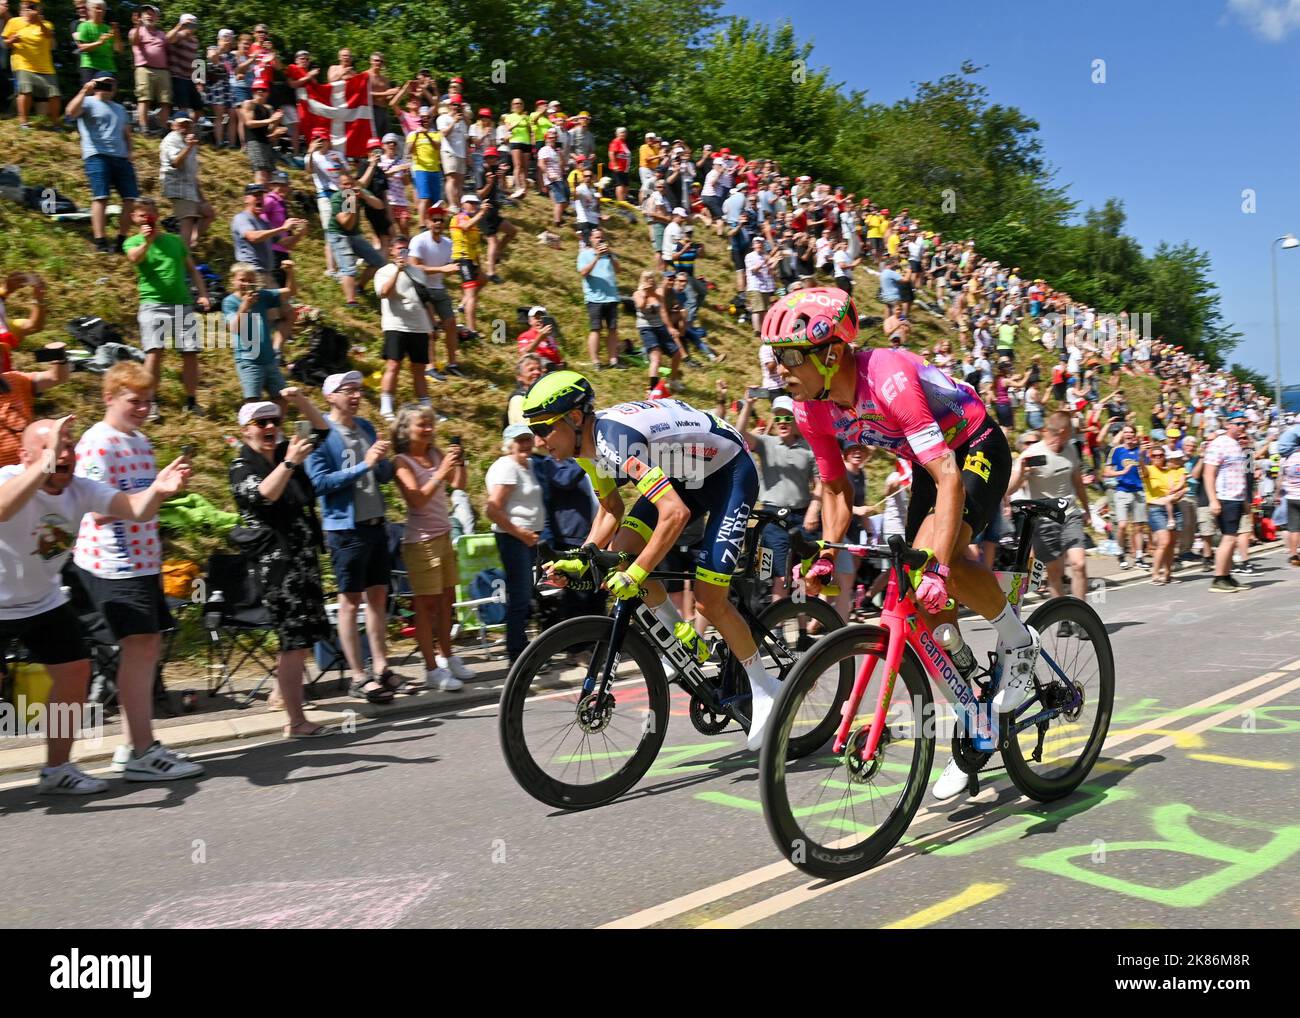 Magnus CORT and Sven Erik BYSTRÃ˜M giving the home crowd something to cheer for at they sprint for the KOM points during Tour De France, Stage 2, Roskilde to Nyborg, Denmark, 1st July 2022, Credit:Pete Goding/Goding Images/PA Images Stock Photo